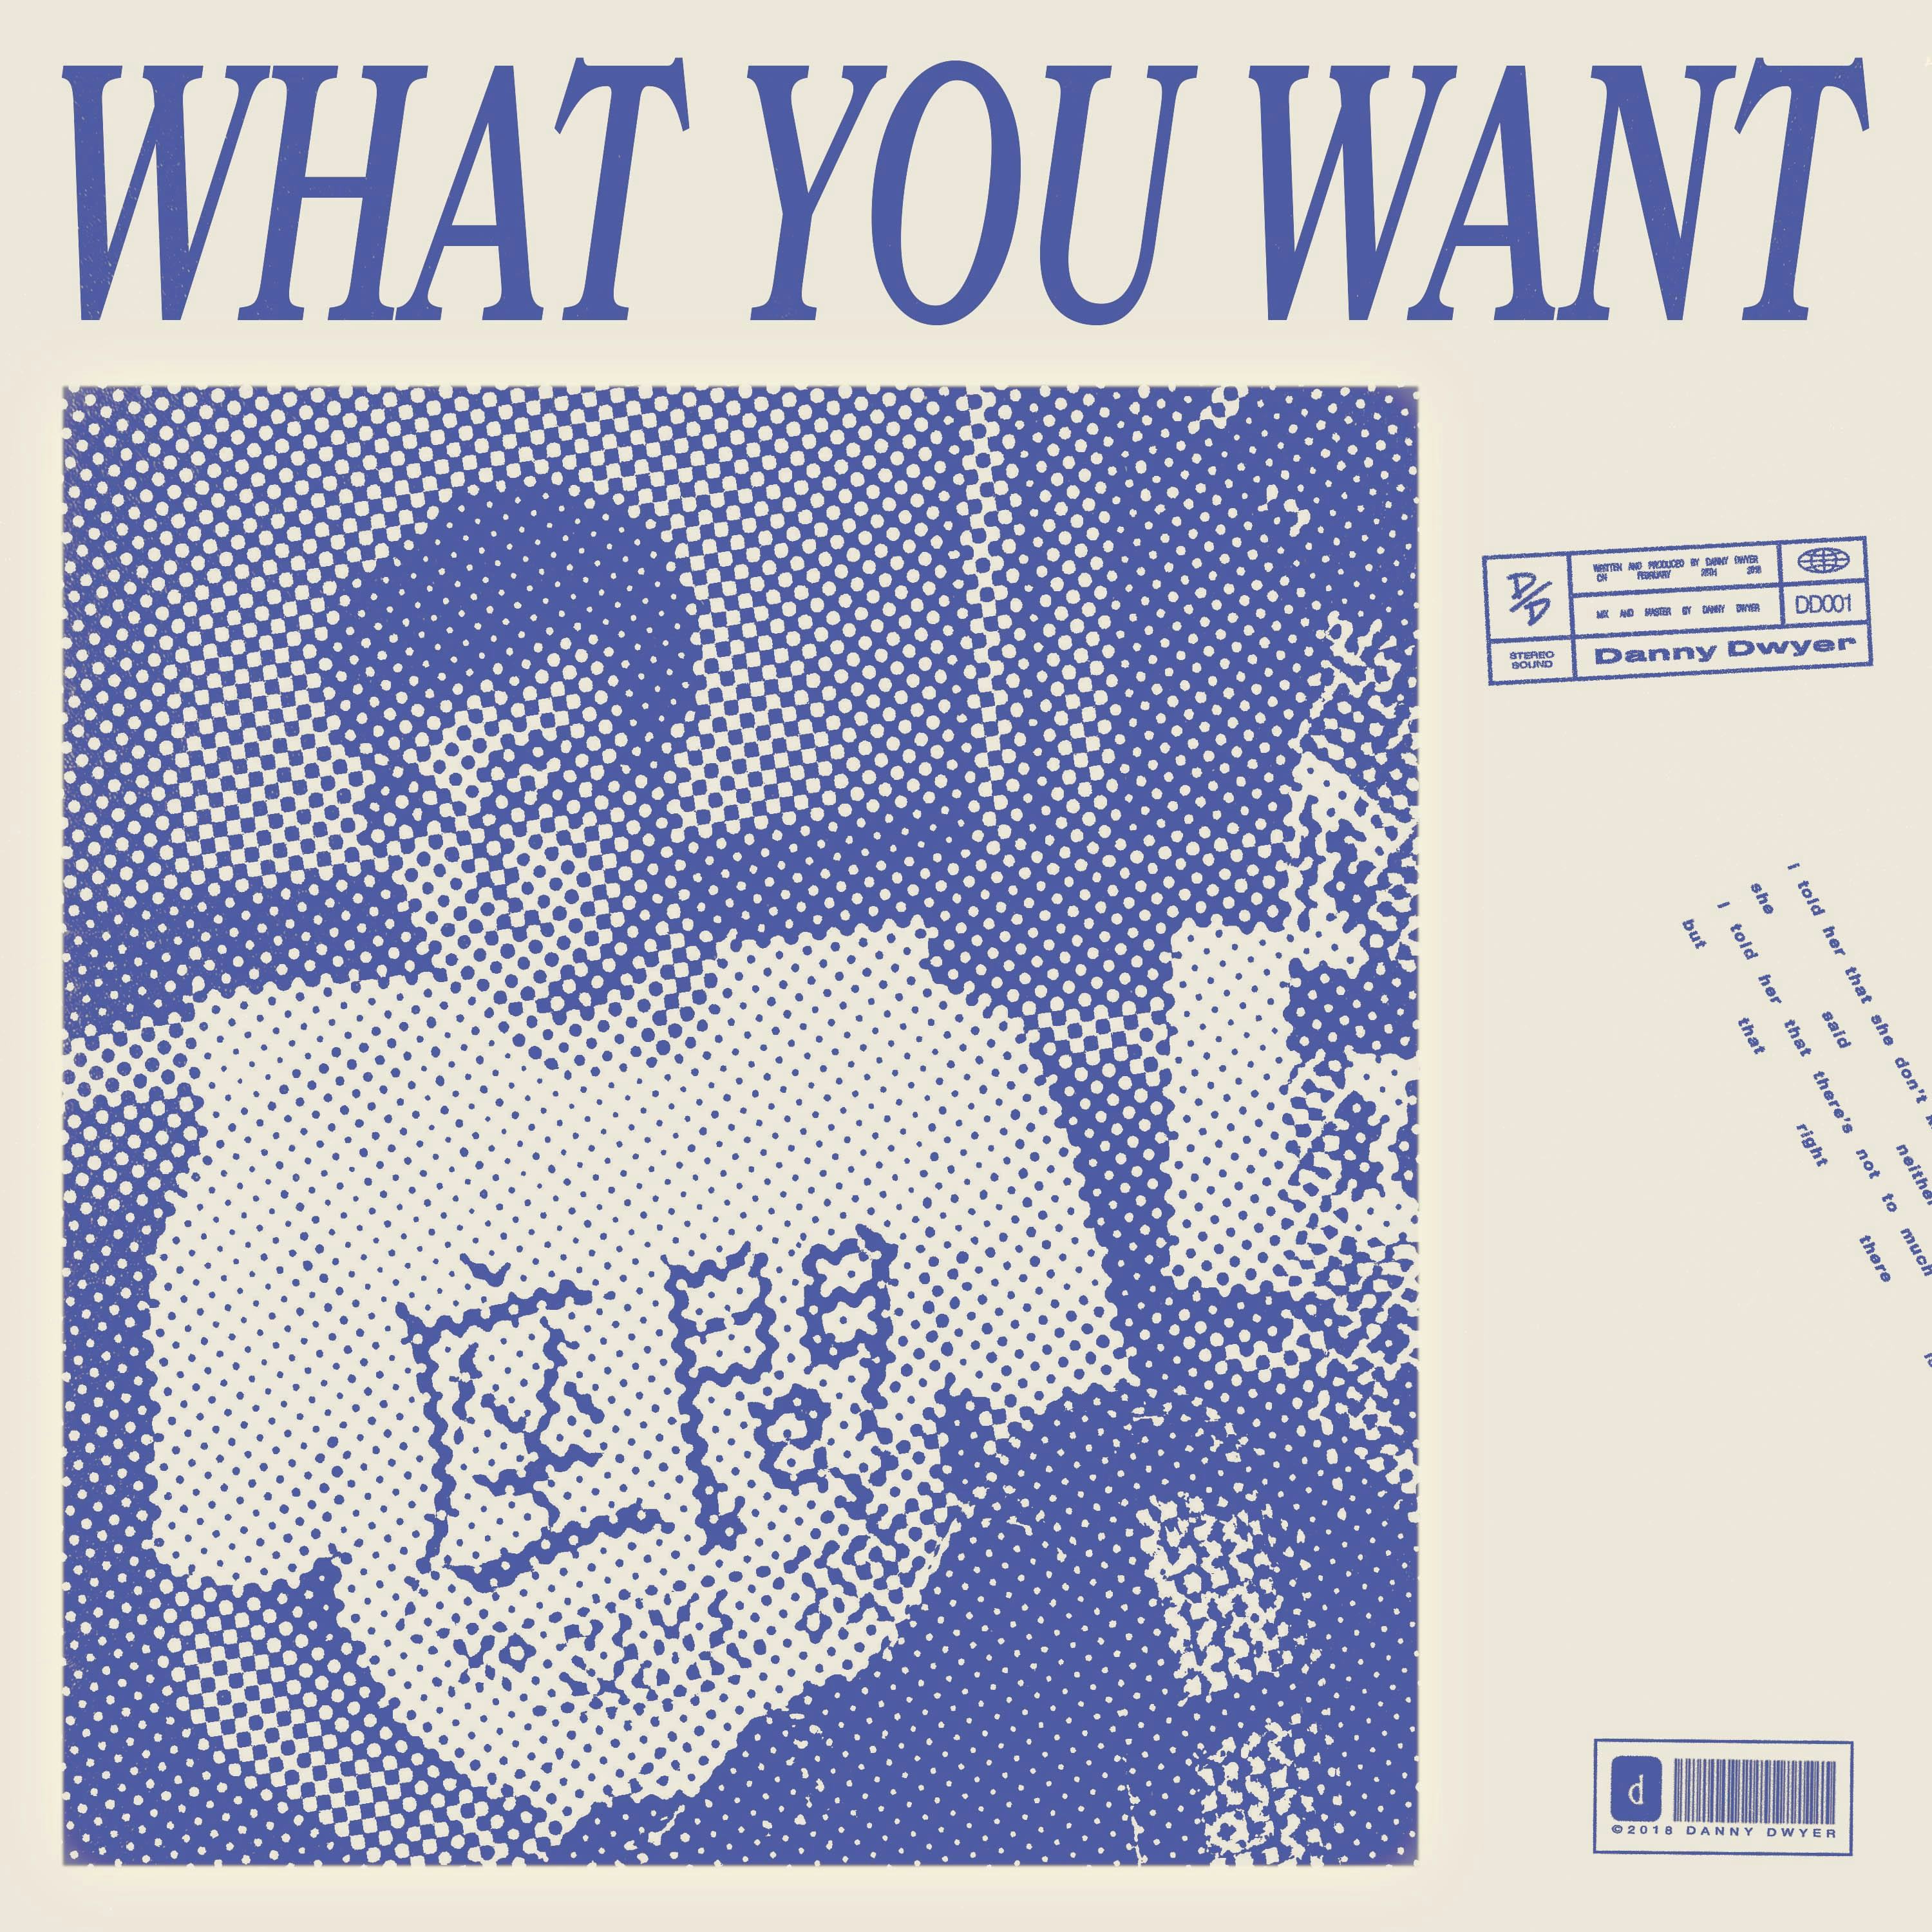 Cover art for What You Want by Danny Dwyer